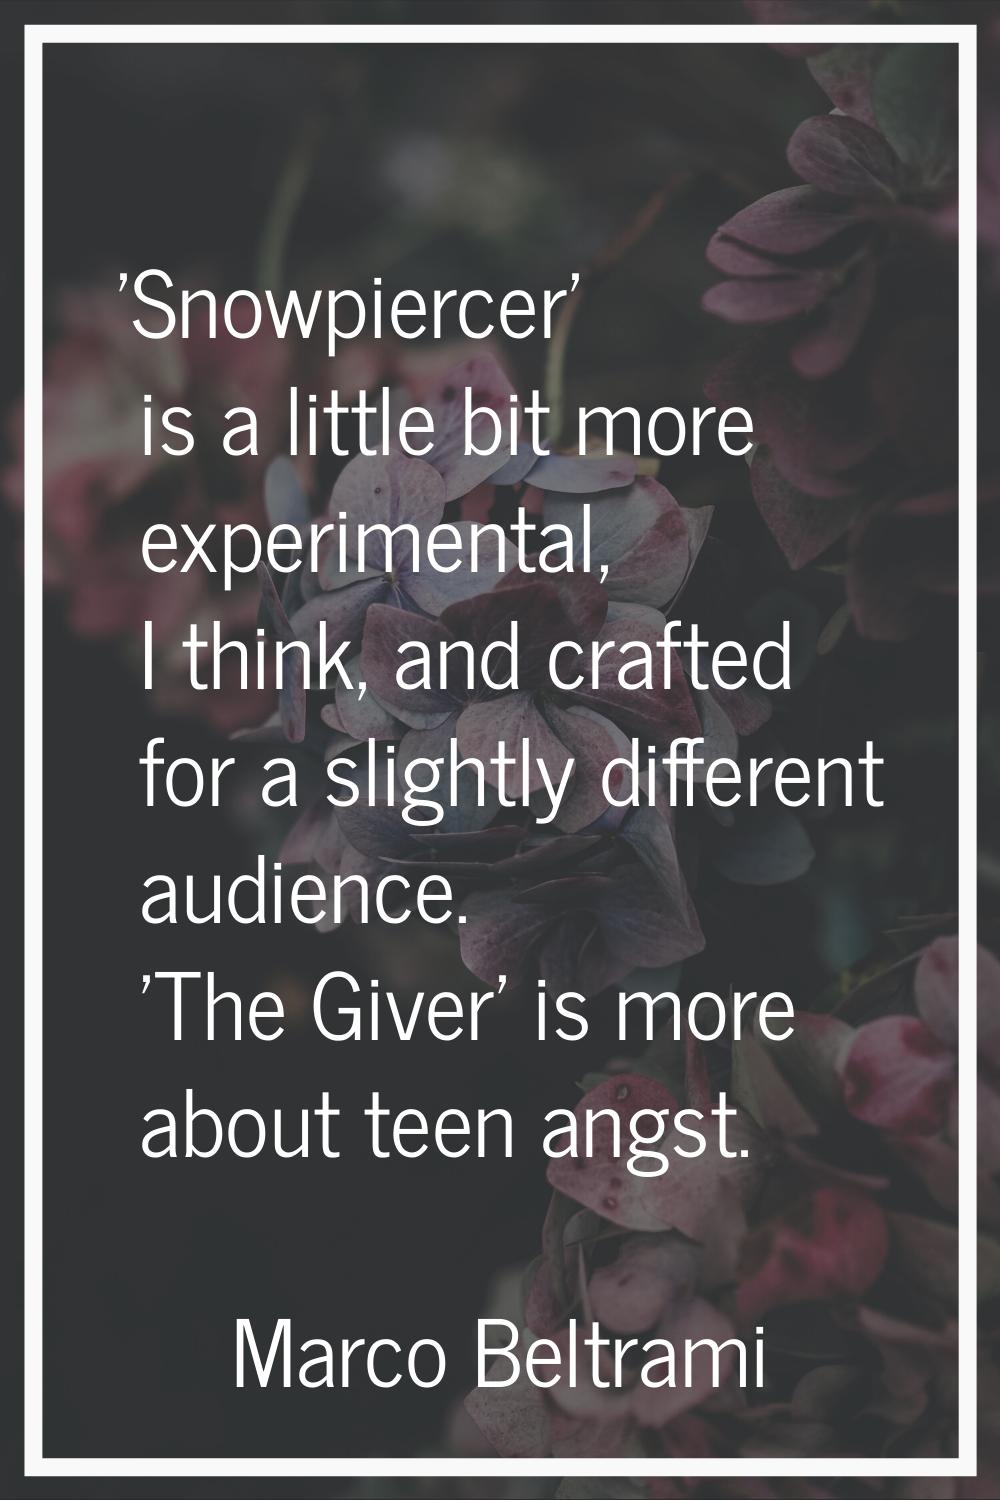 'Snowpiercer' is a little bit more experimental, I think, and crafted for a slightly different audi